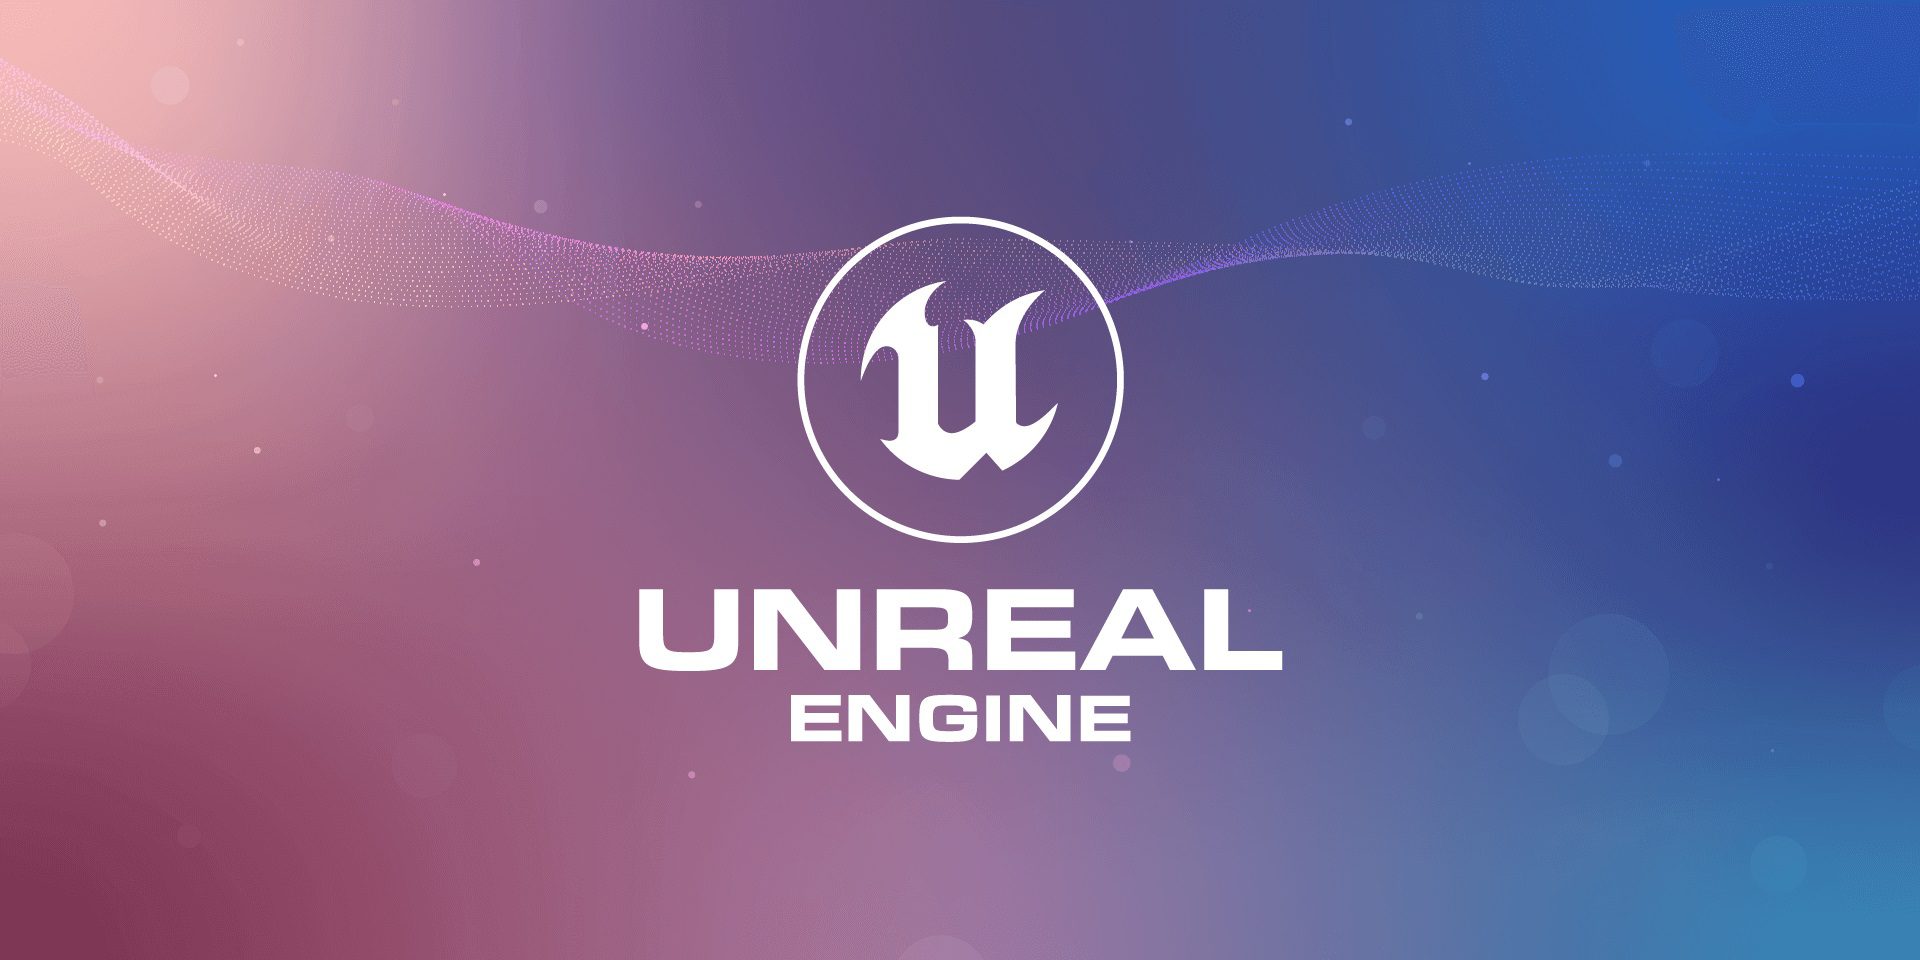 What is Unreal Engine?